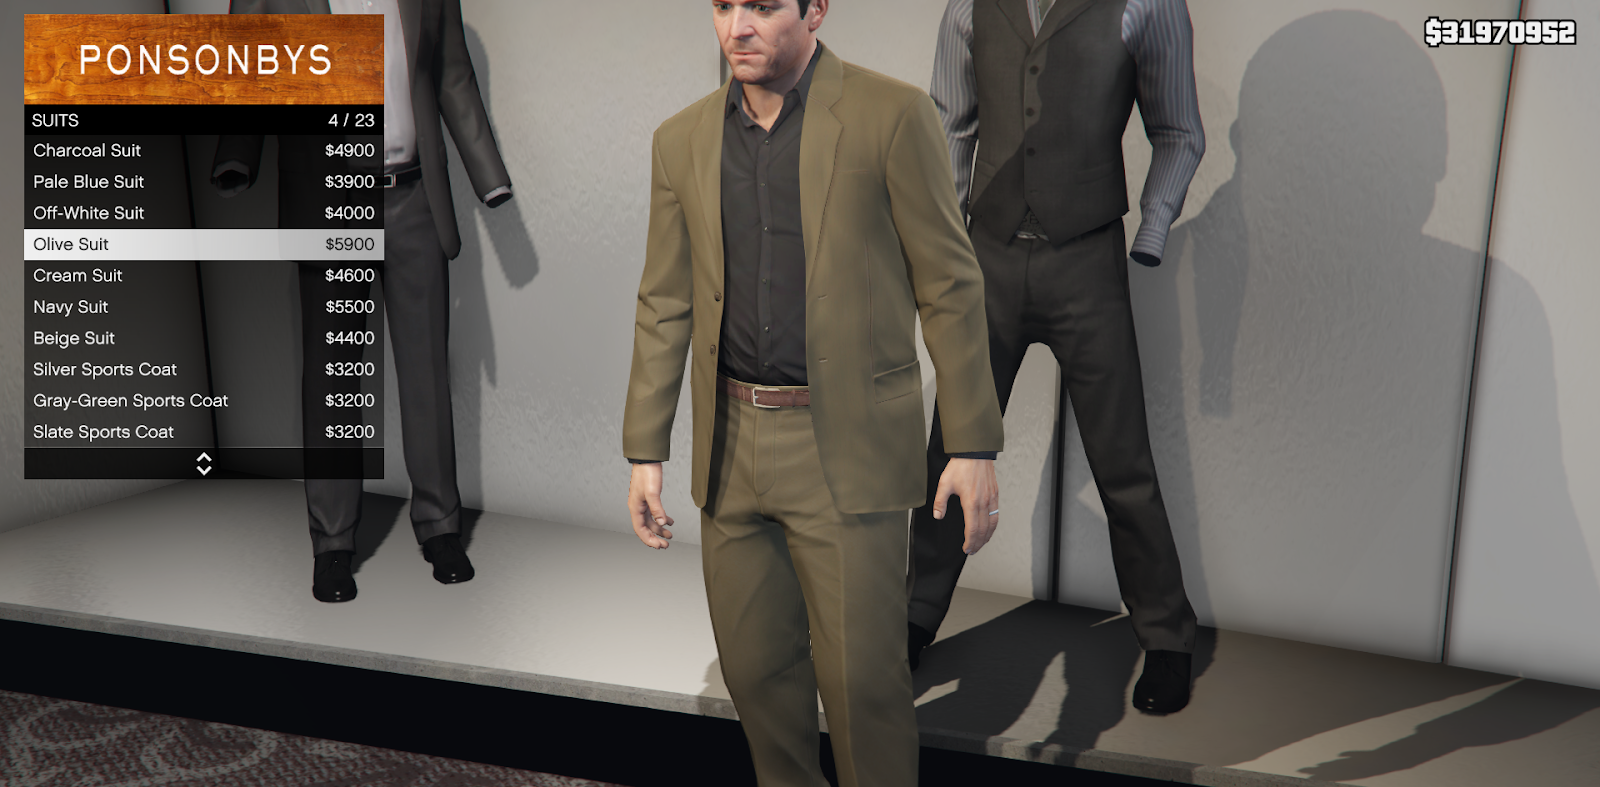 Gta 5 how to get all outfits